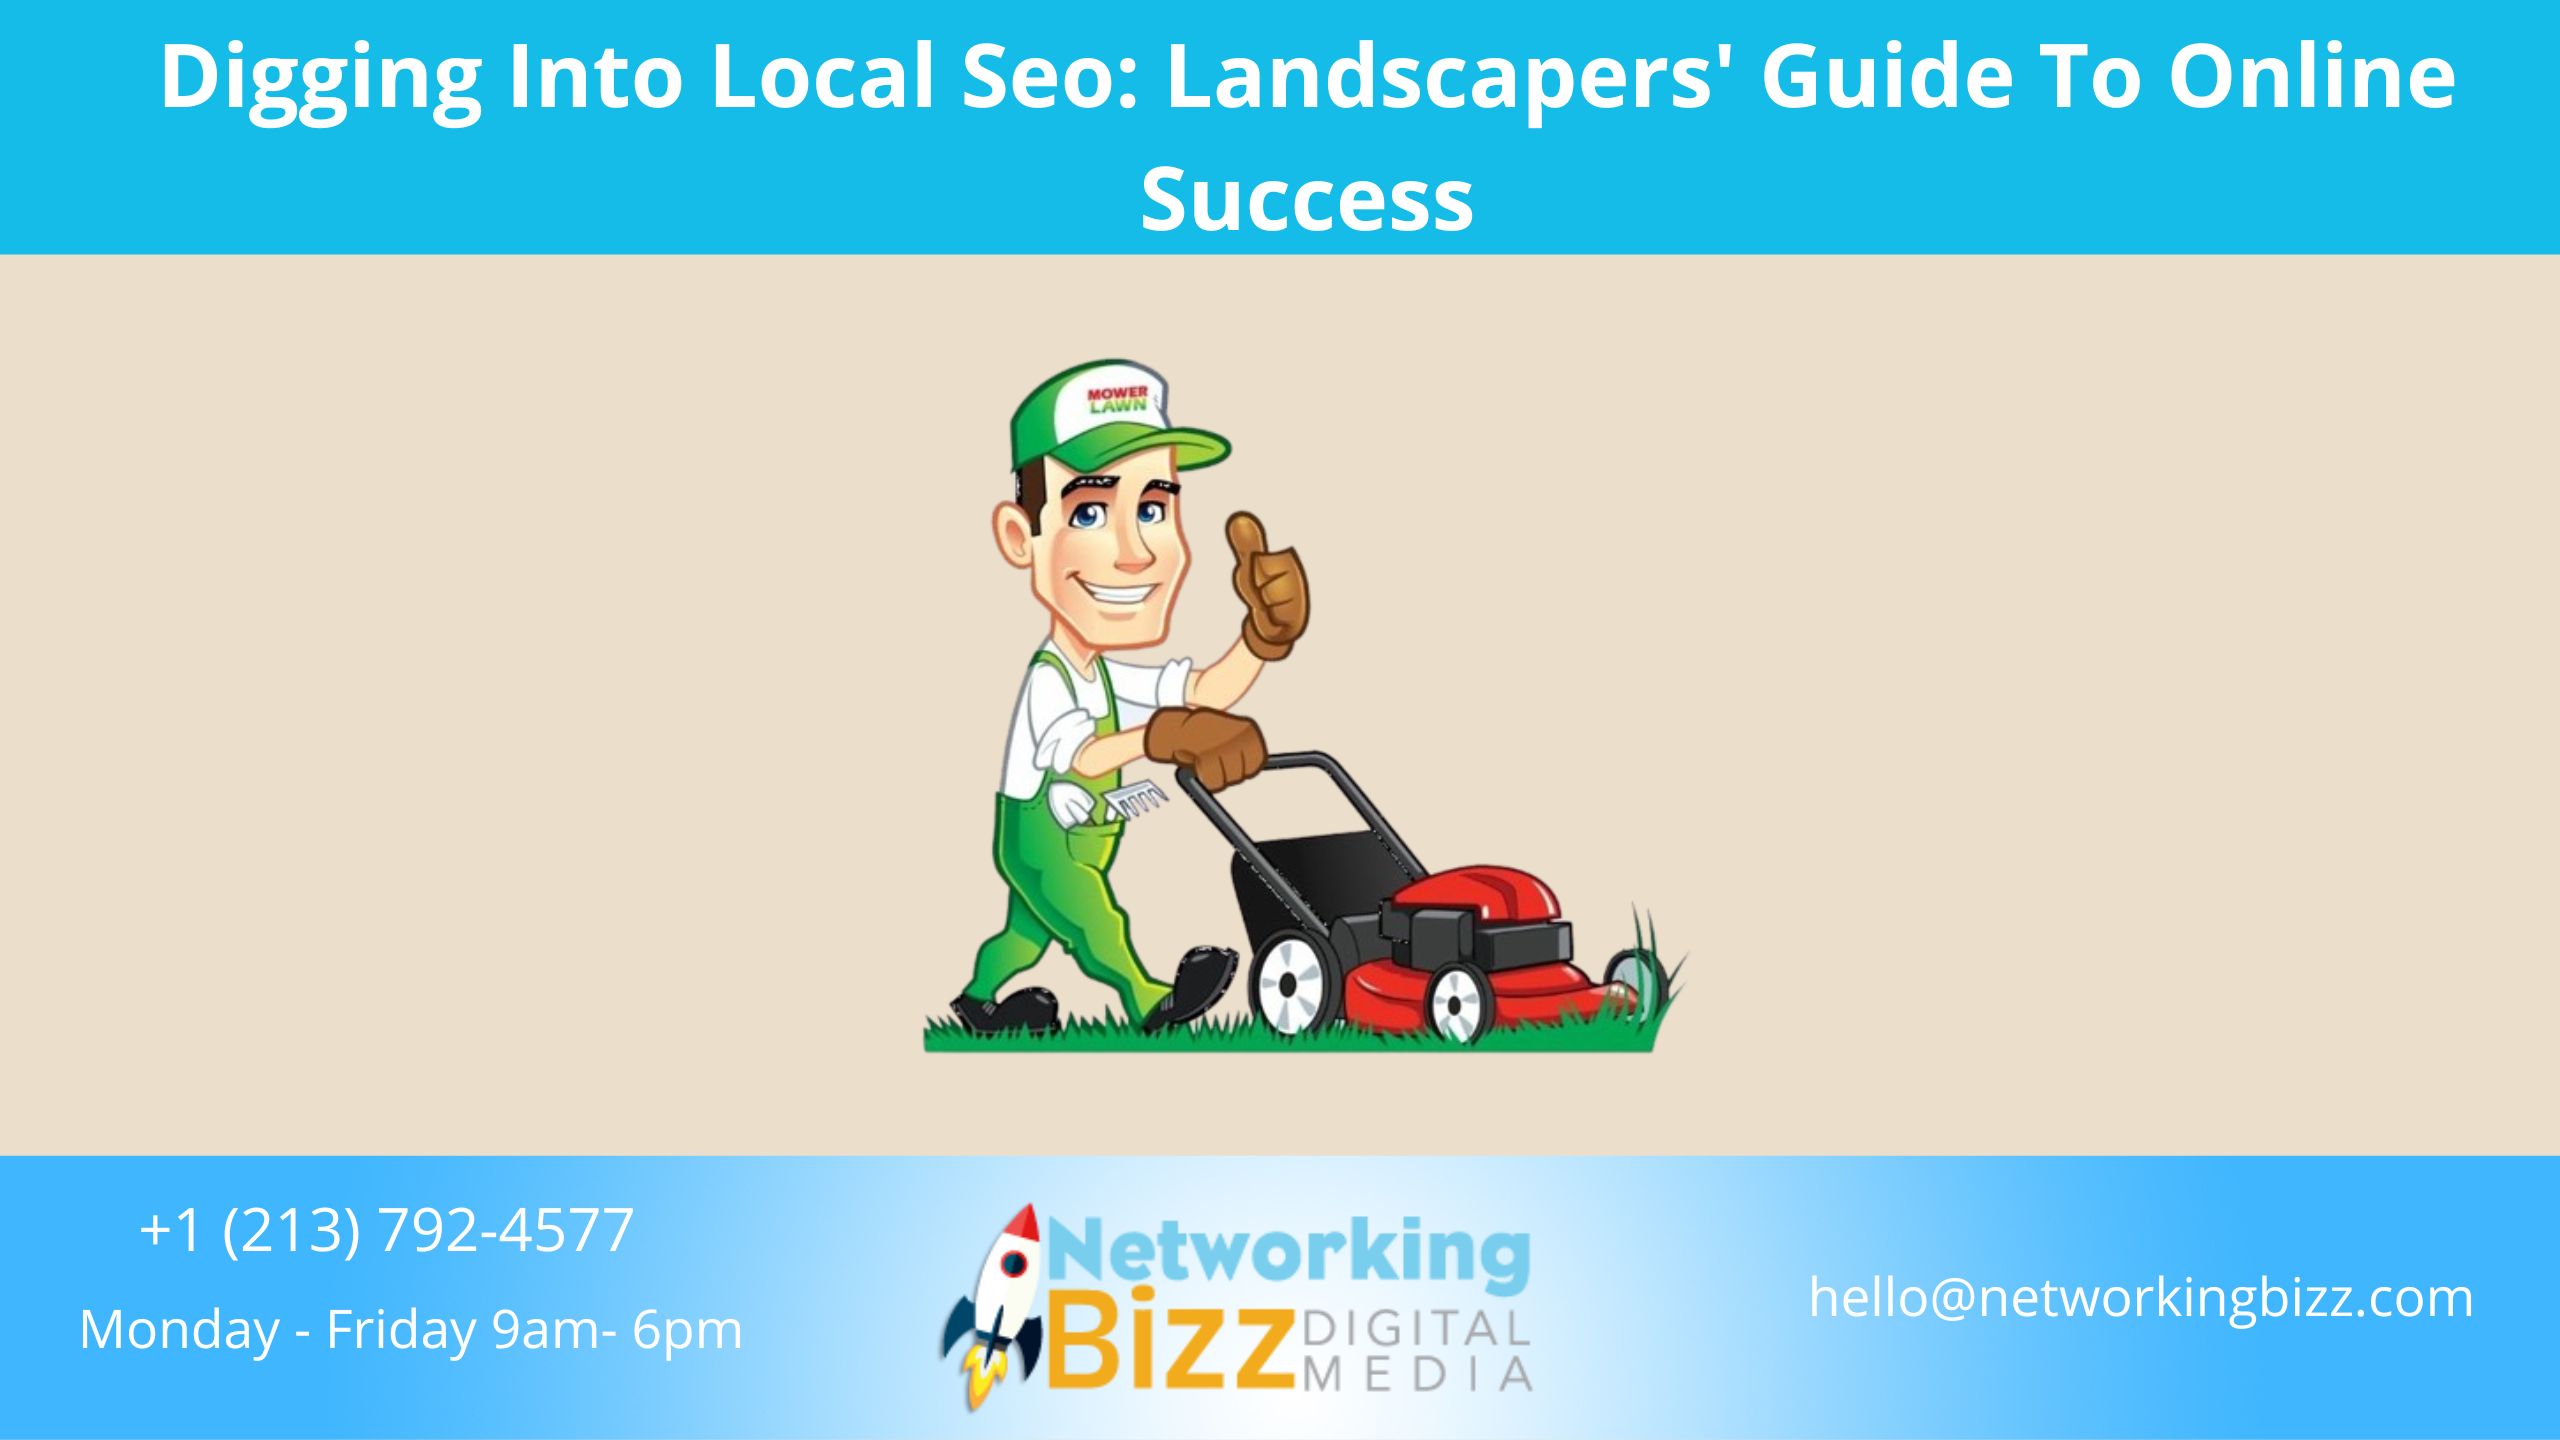 Digging Into Local SEO: Landscapers’ Guide To Online Success